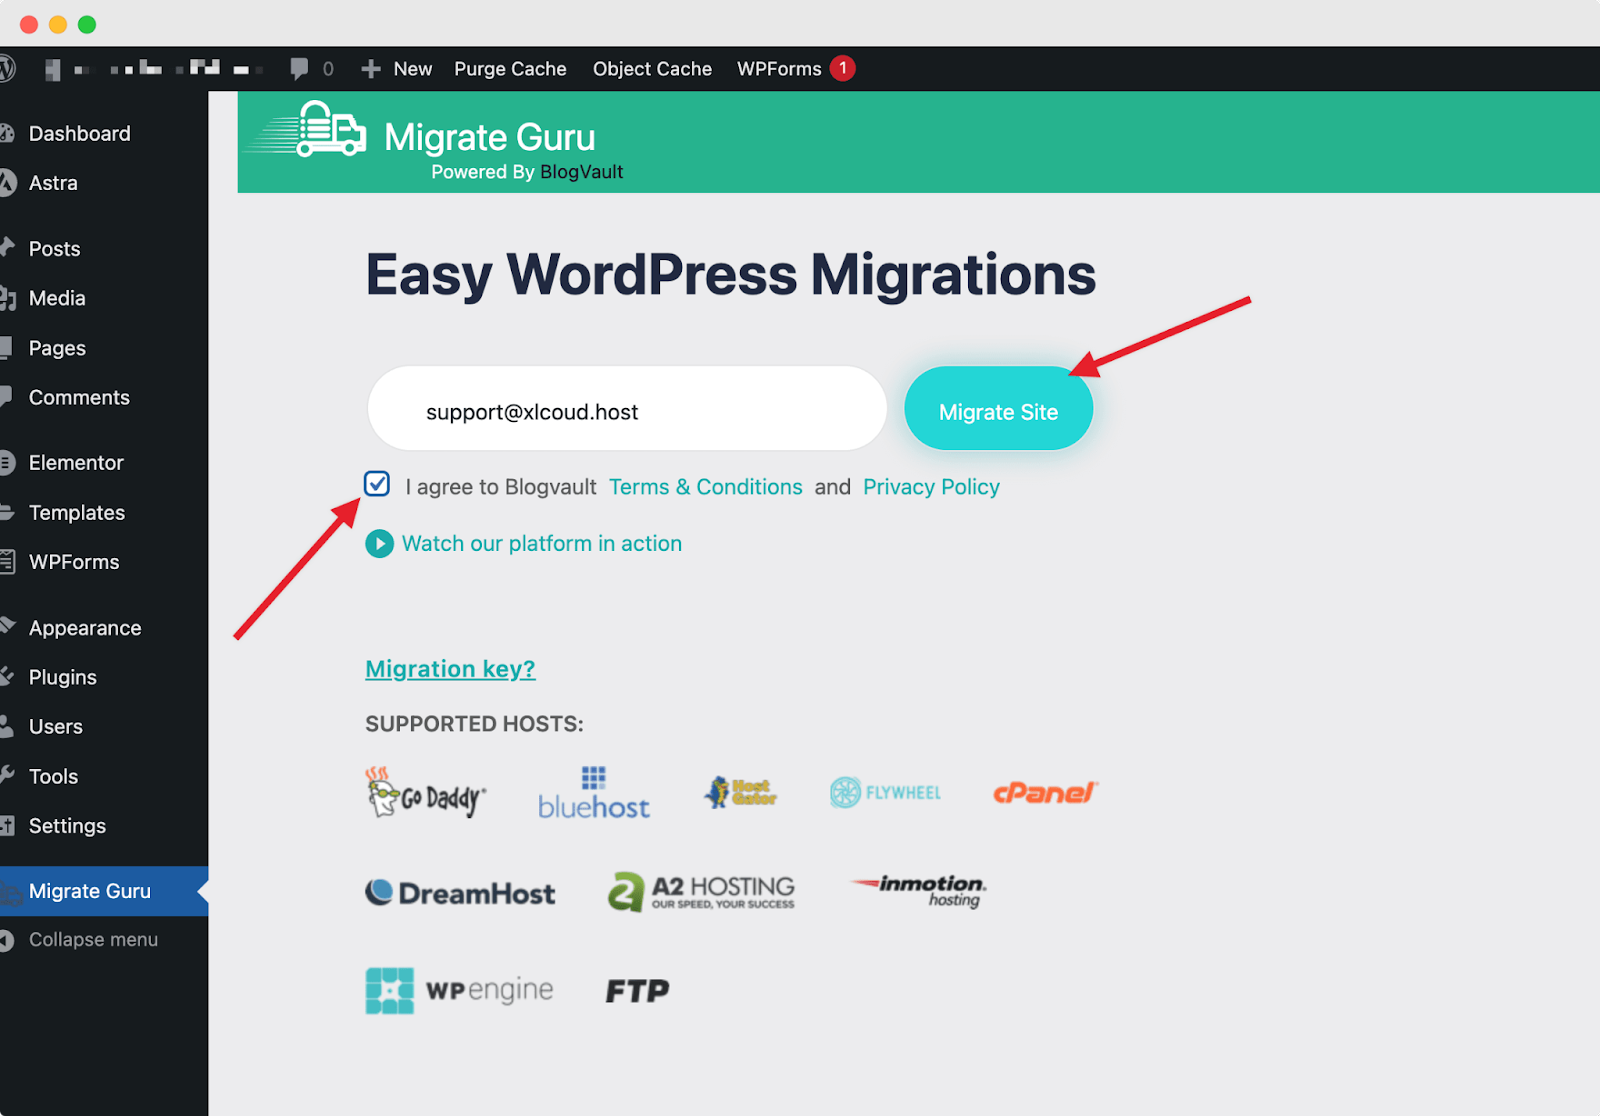 Migrate WordPress From Shared Hosting To Cloud Server